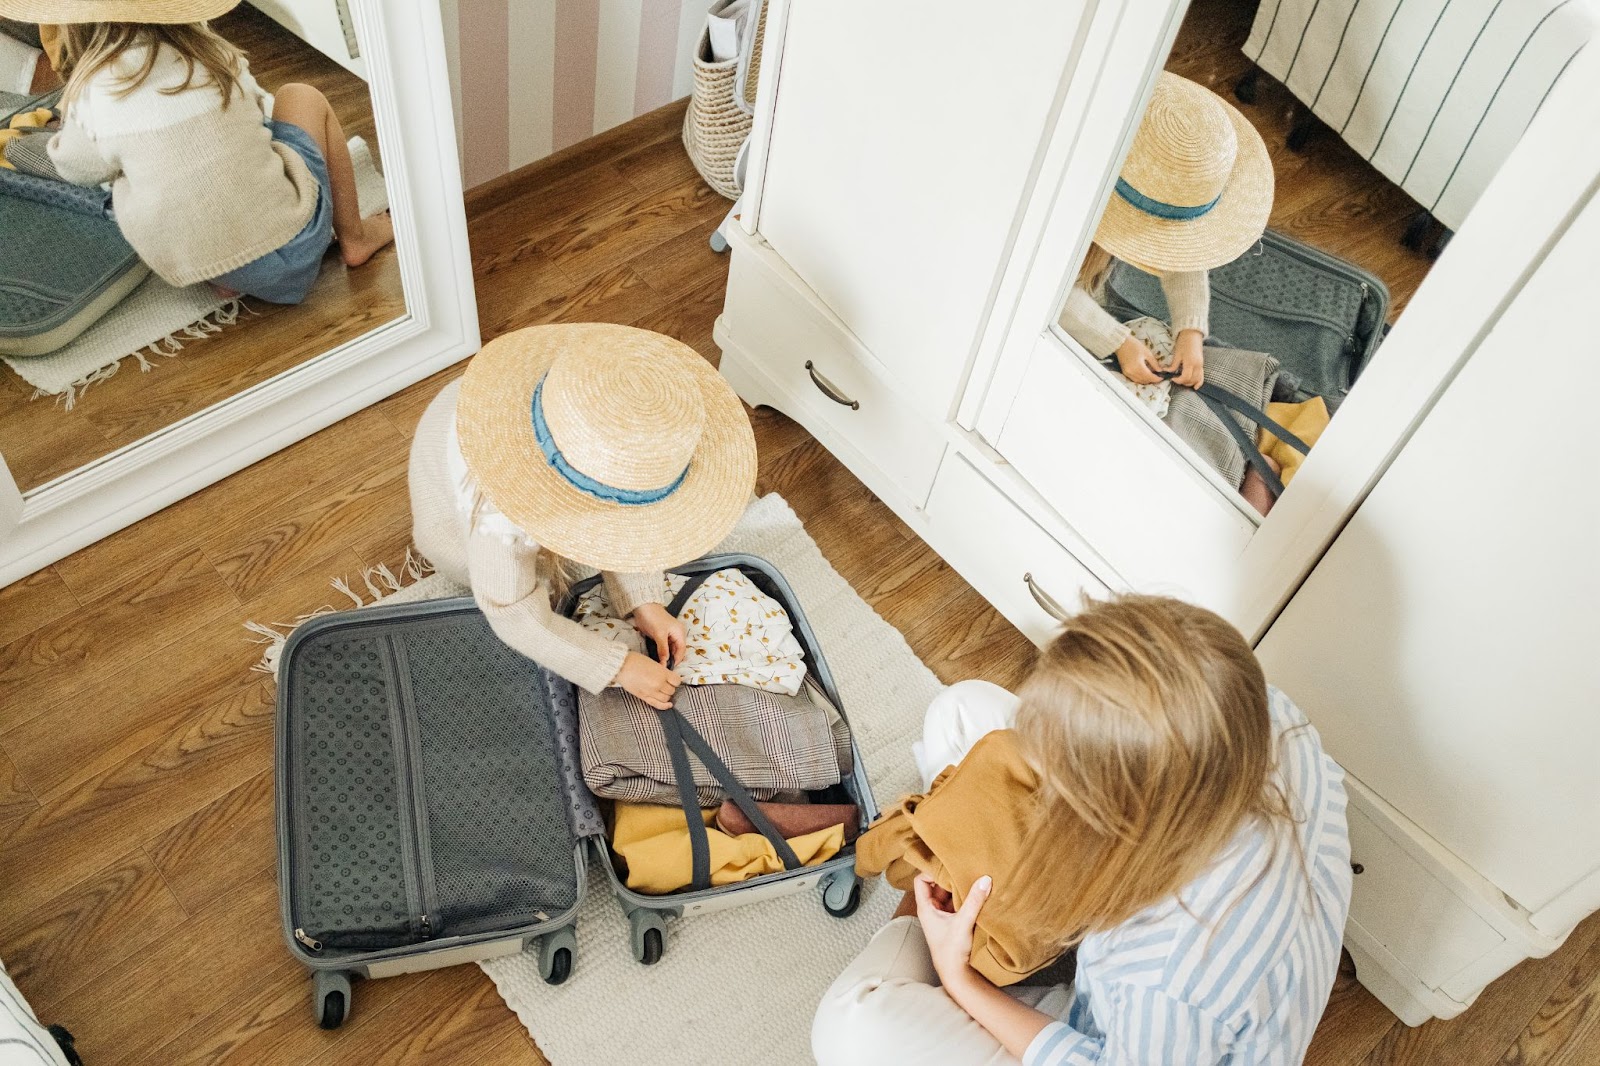 Family Vacation Travel Essentials